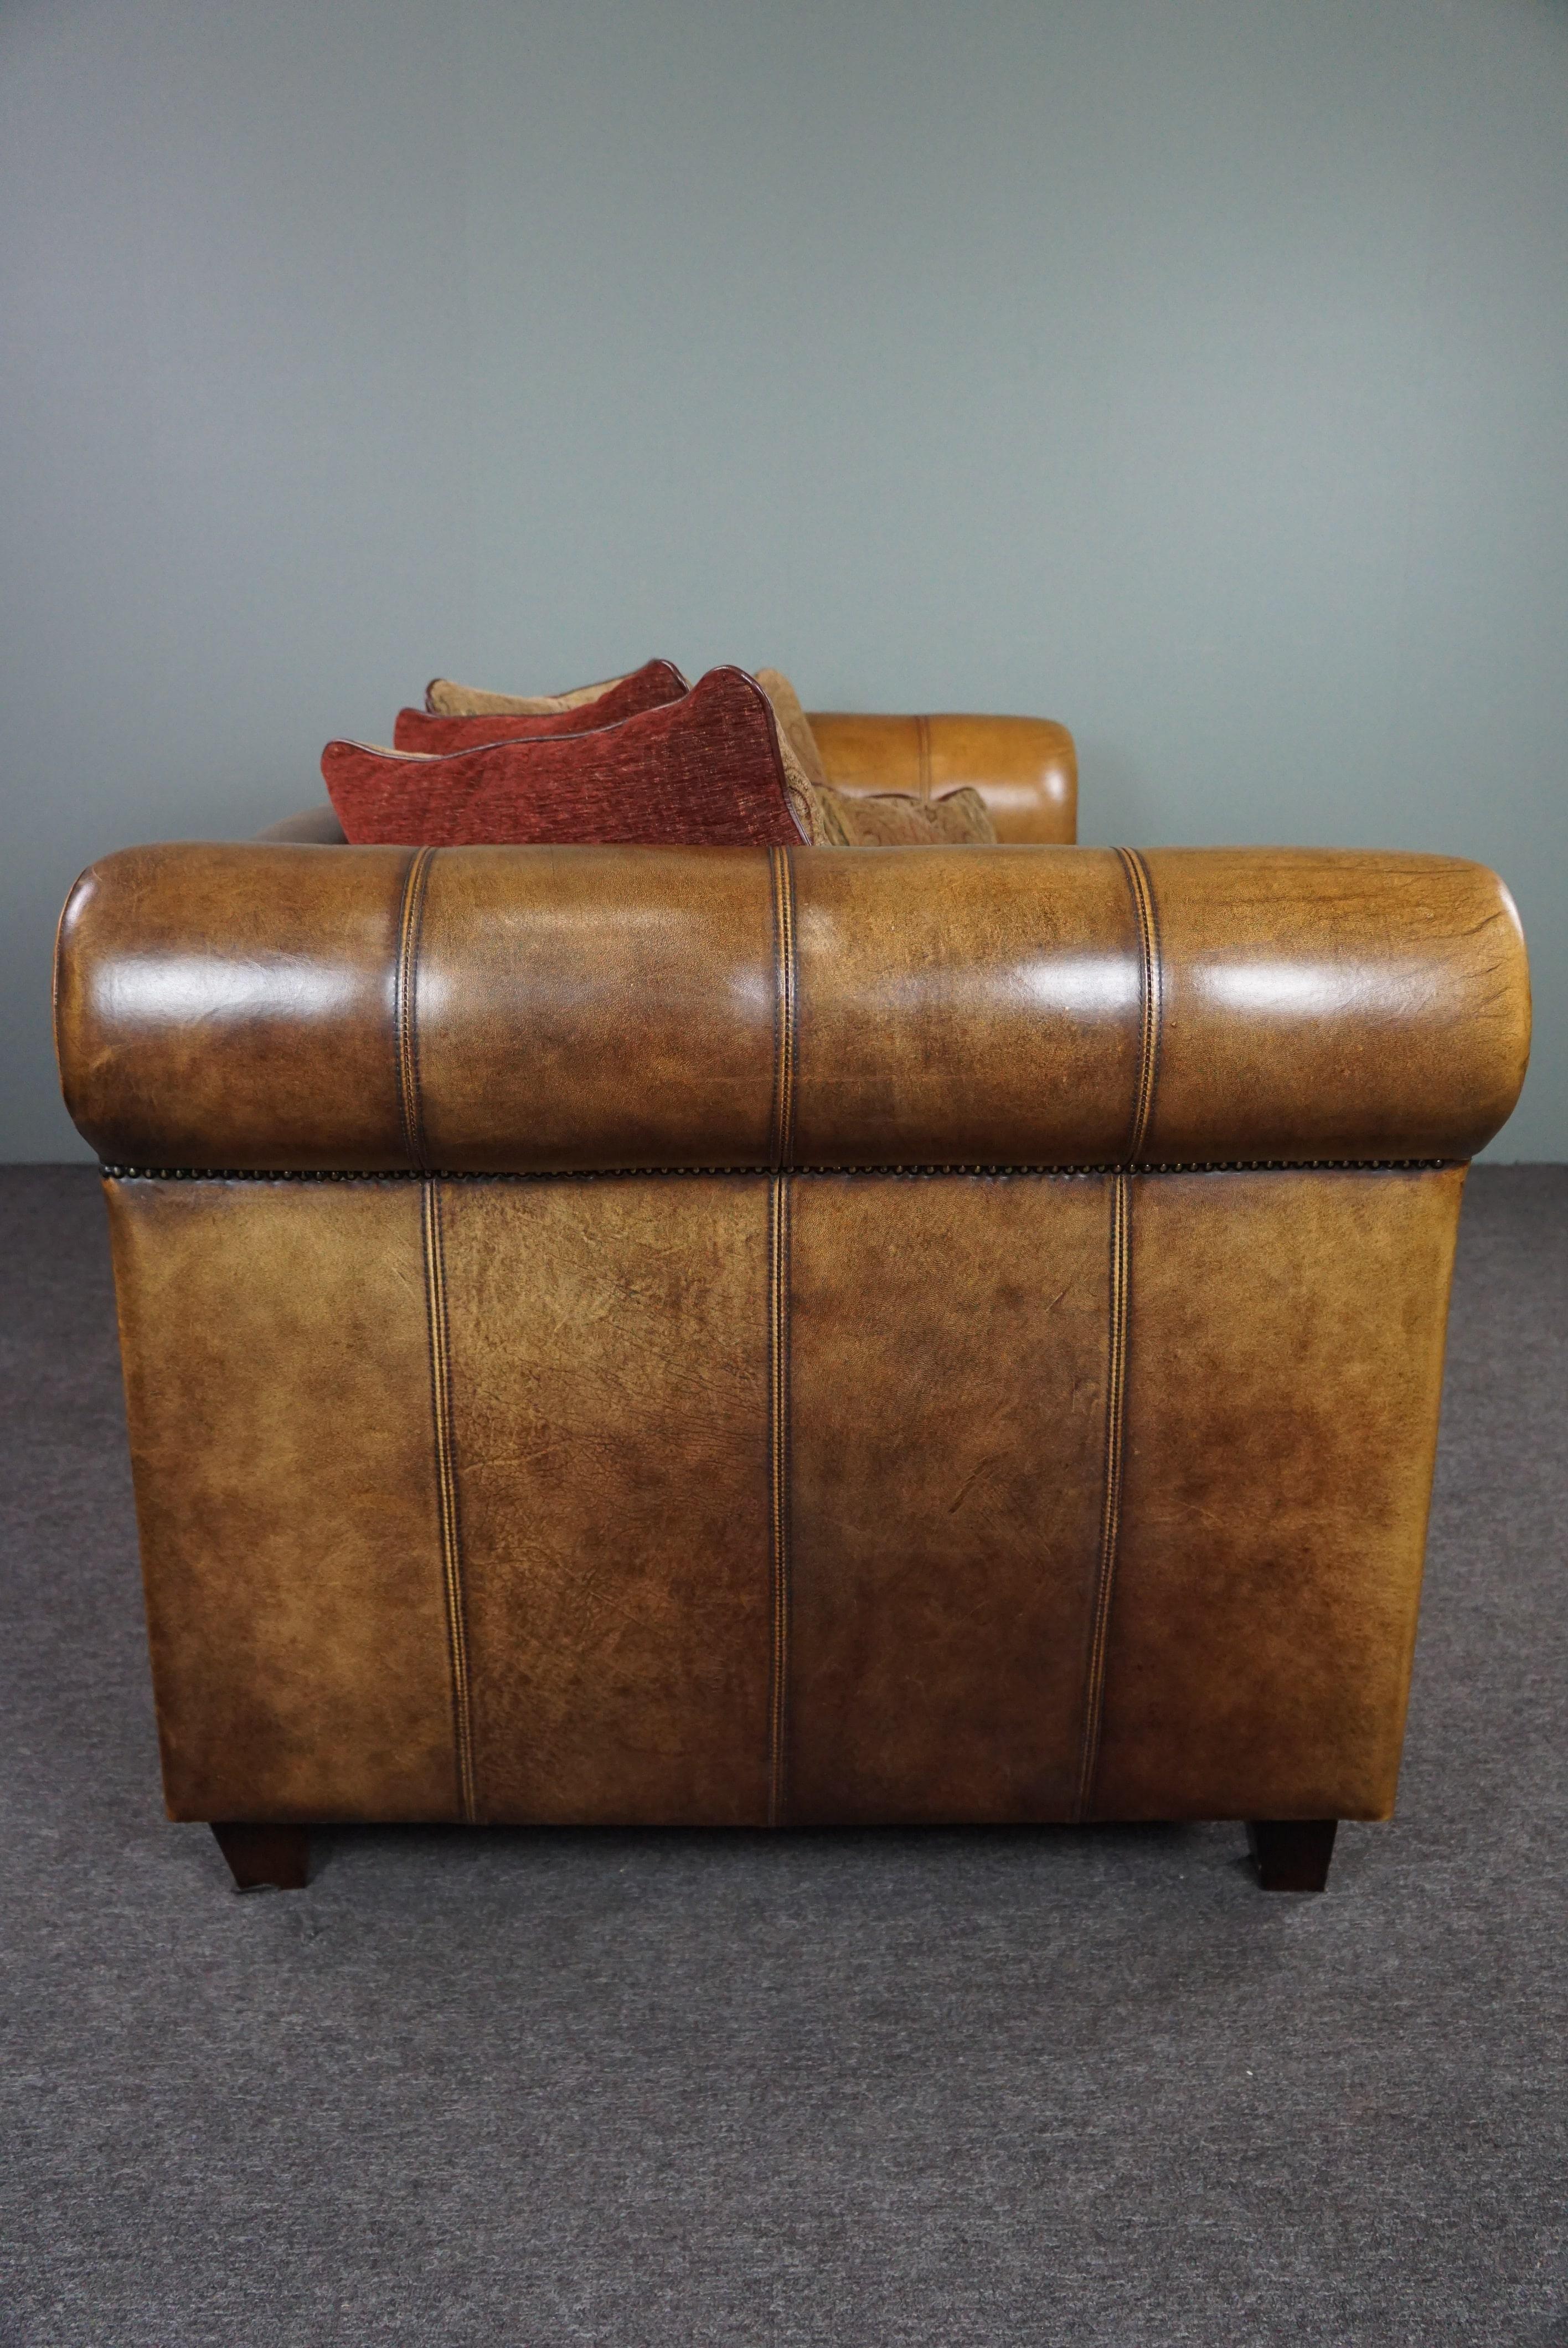 Offered is this beautiful sheep leather sofa with both the appearance and the seating comfort.

The warm-colored fabric cushions make the beautiful deep-colored sheep leather stand out even better and this sofa has the best of both worlds. This